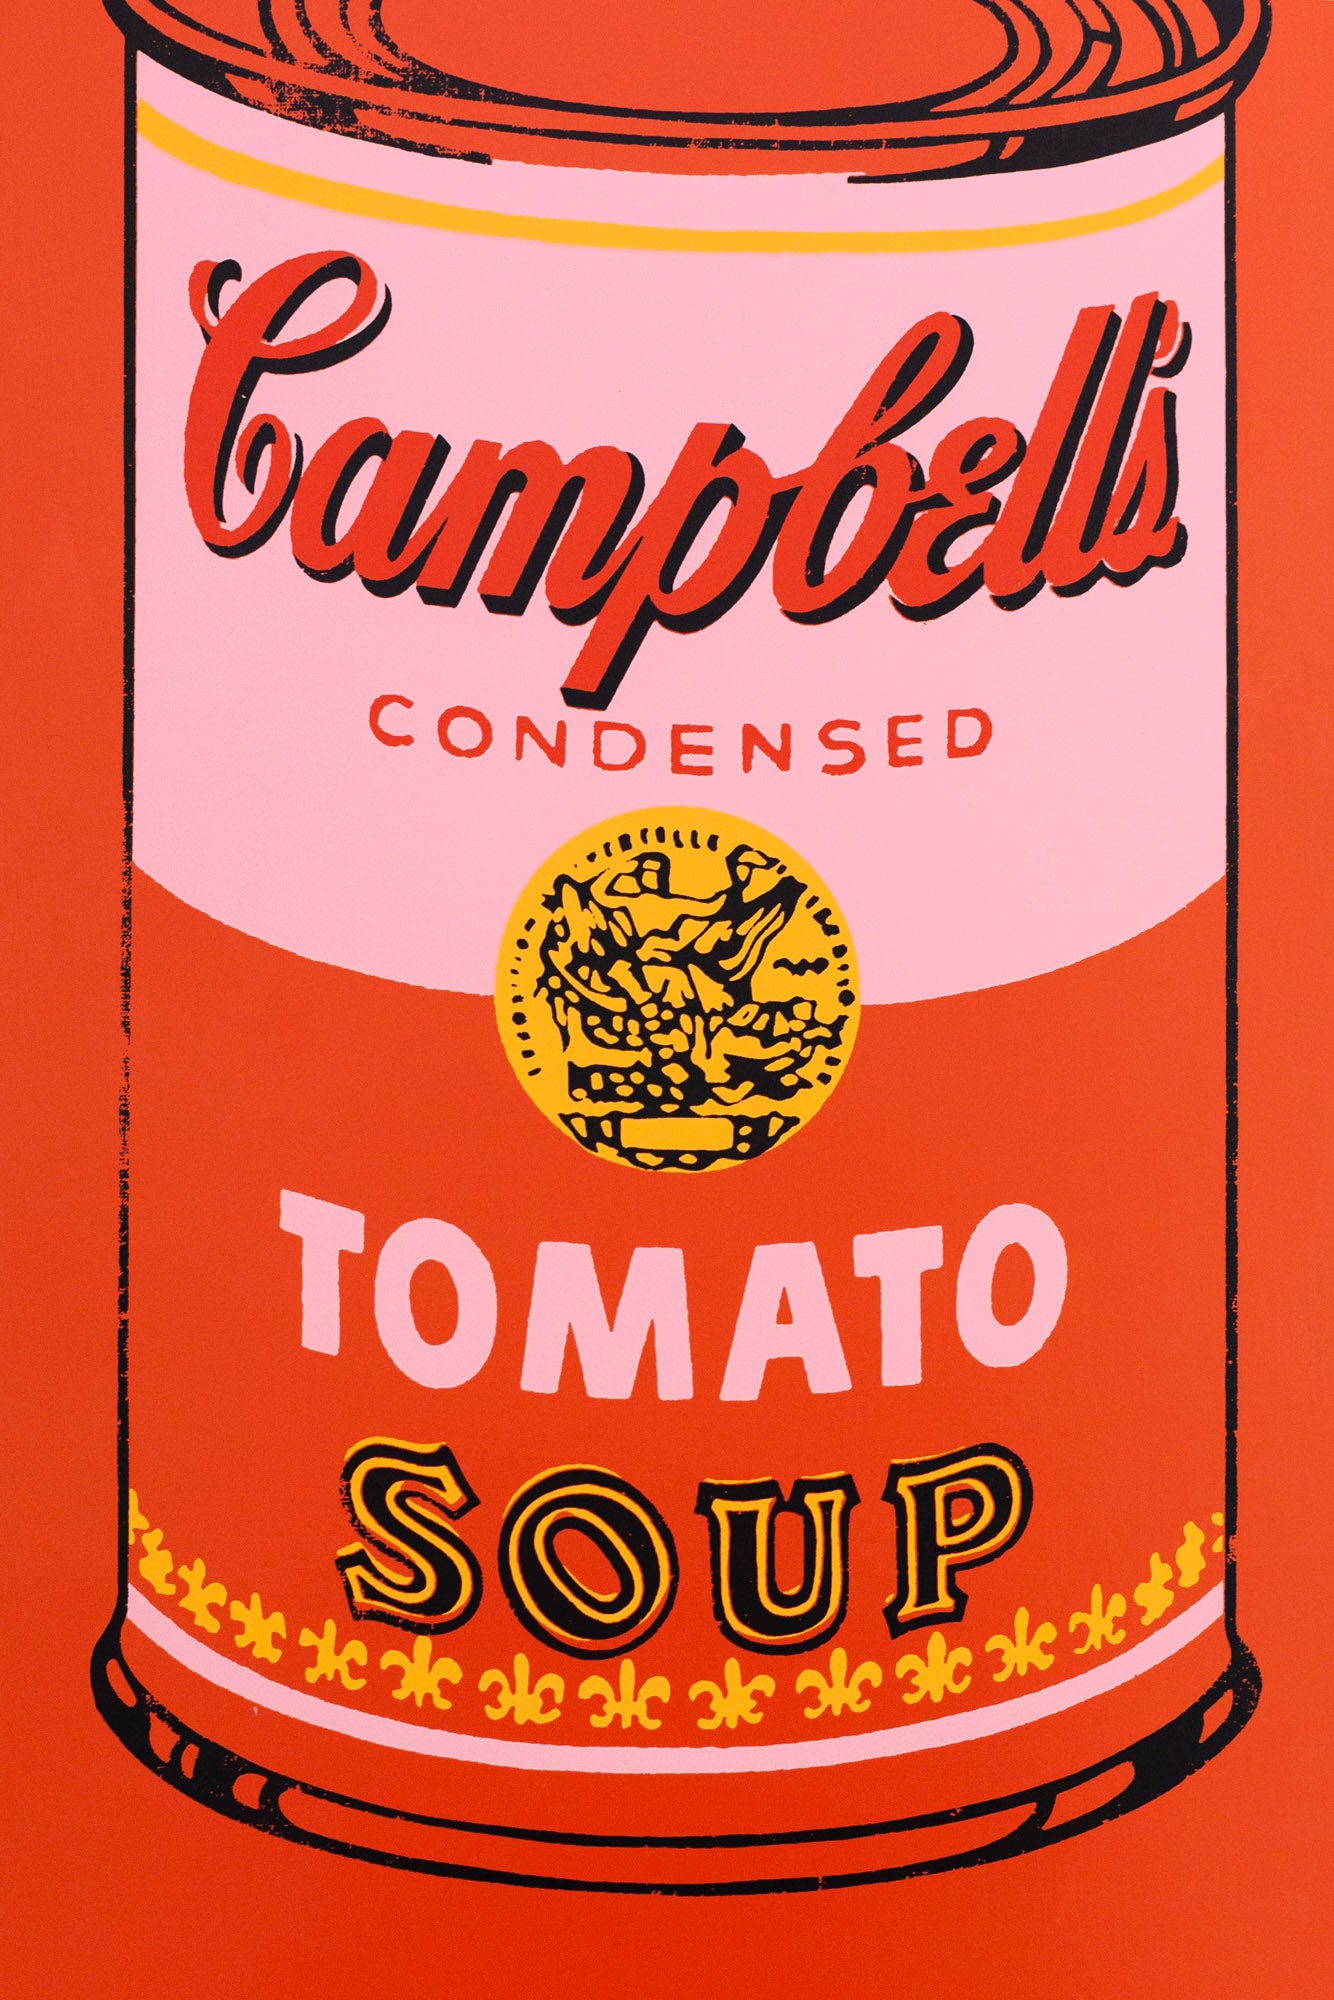 Andy warhol coloured campell's soup peach original art solo deck by THE SKATEROOM bottom edition